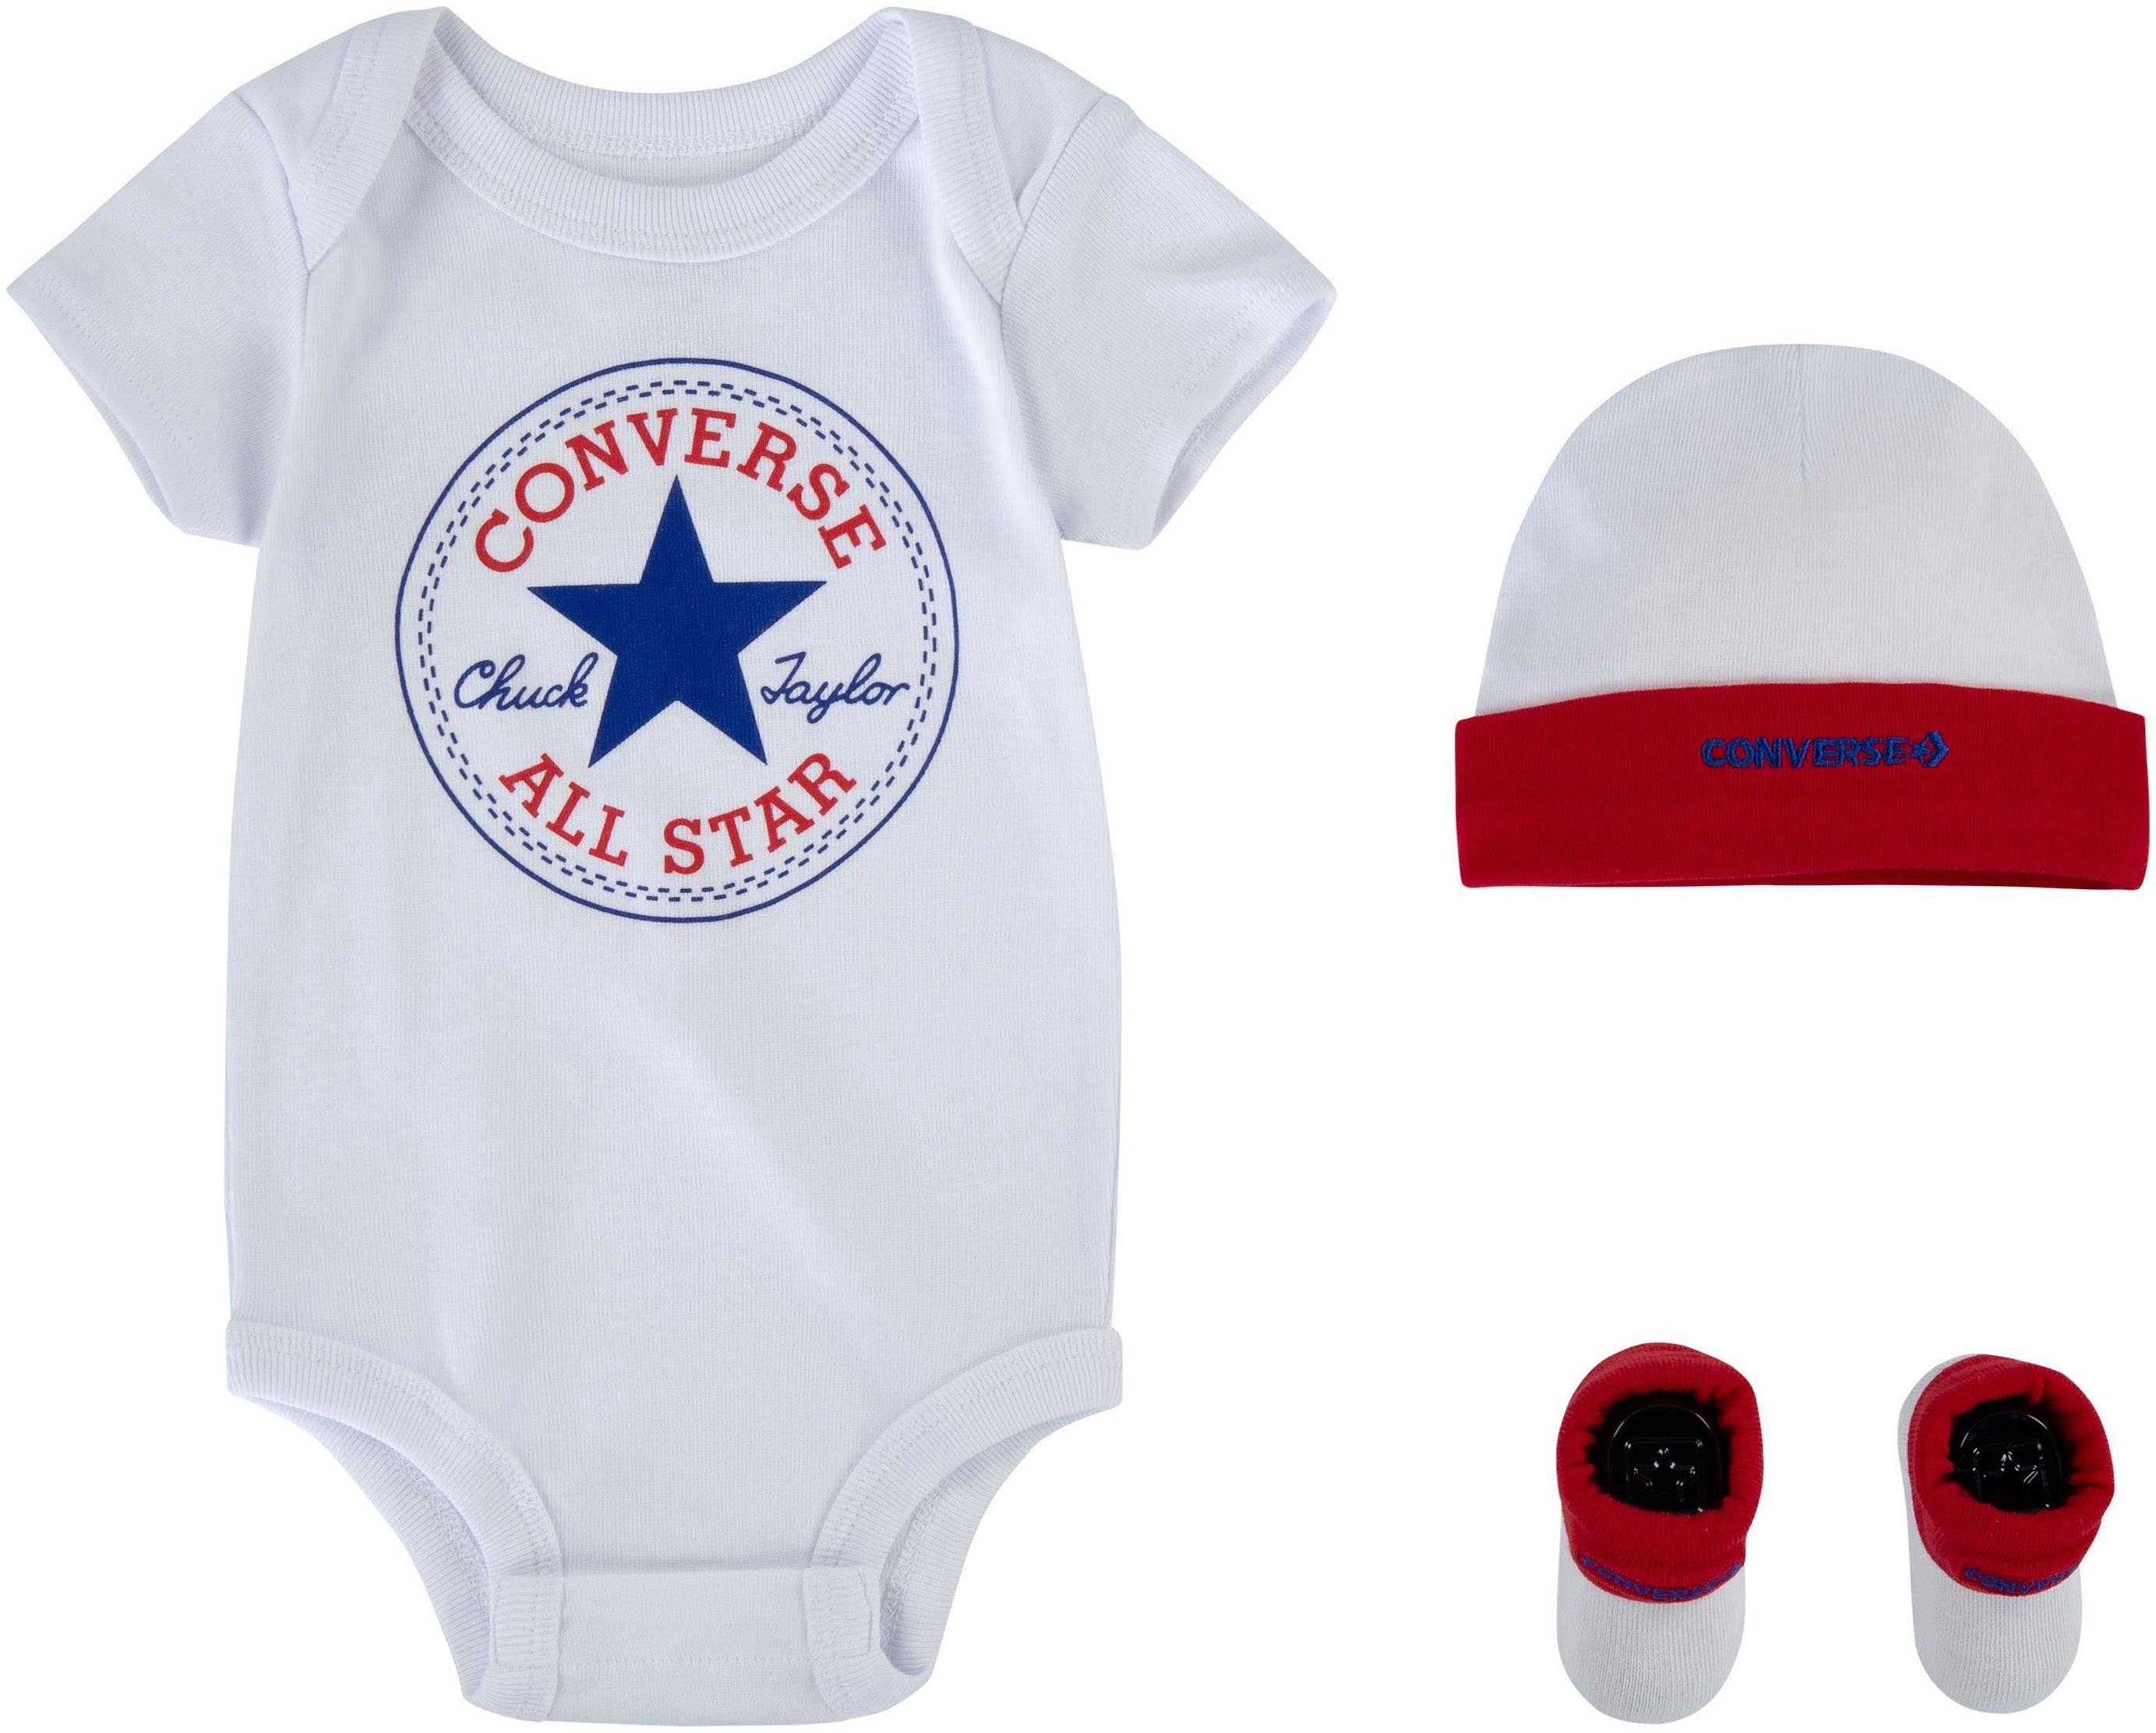 HAT Body BOO CTP INFANT Converse BODYSUIT CLASSIC (Packung, 3-tlg)